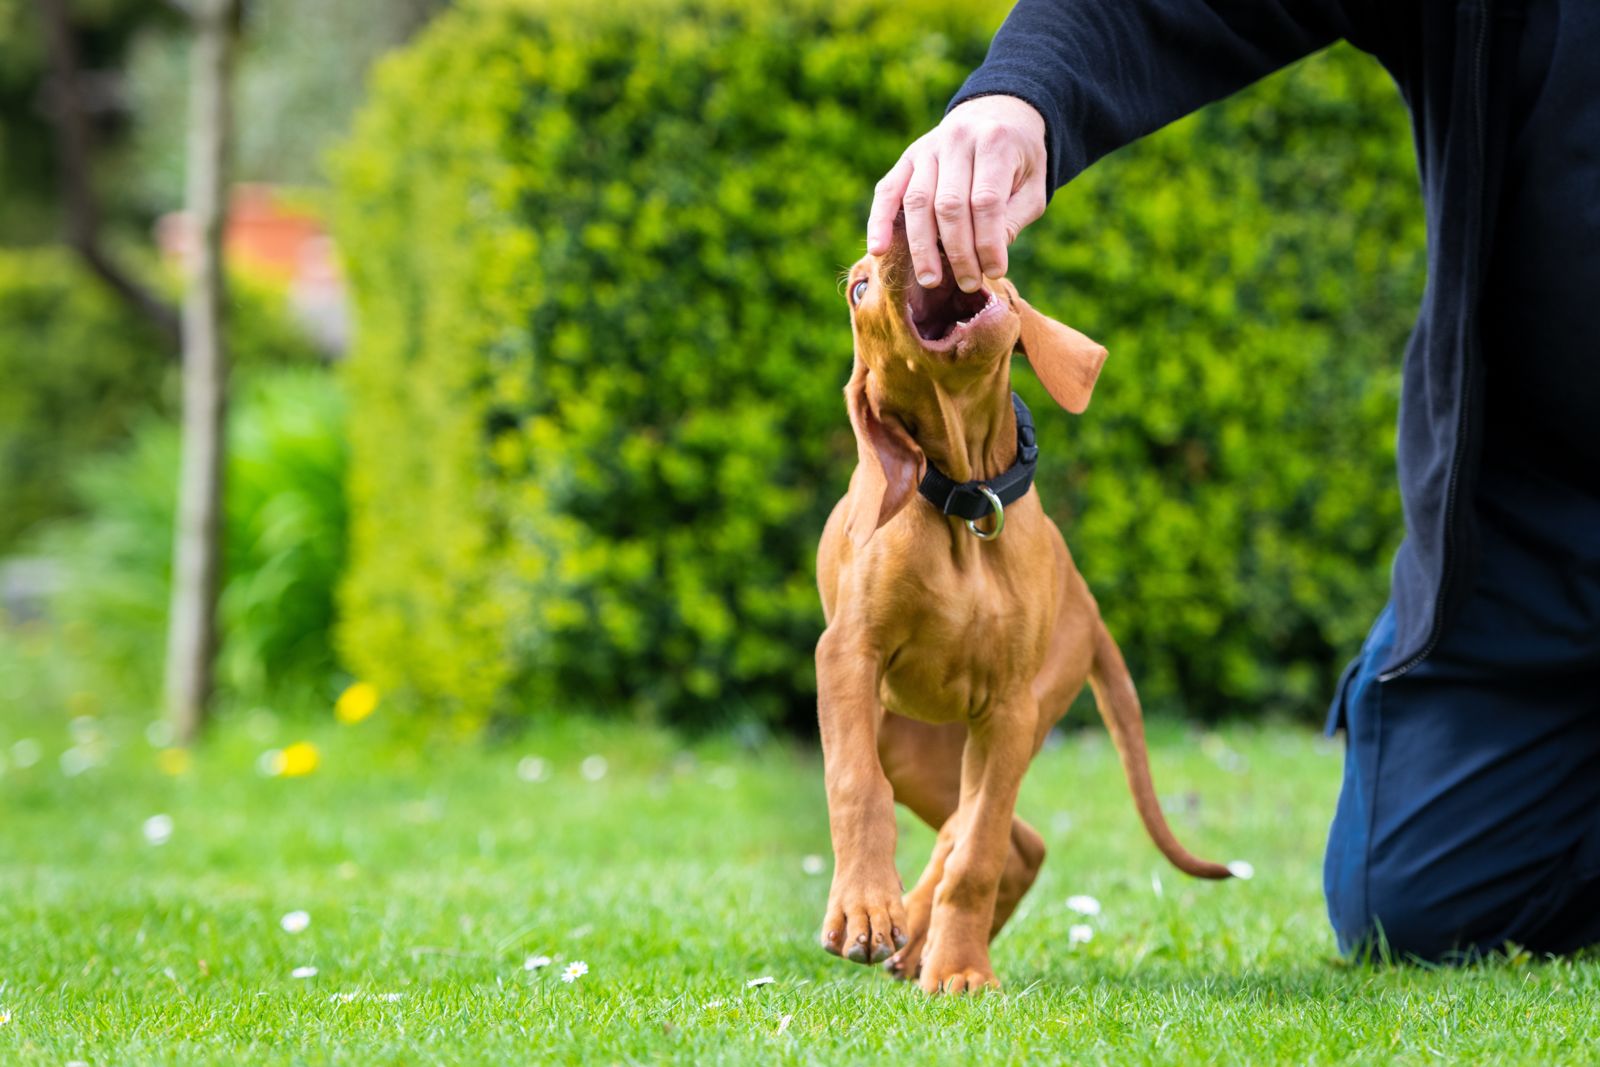 How to File Claims for Dog Bite Injuries